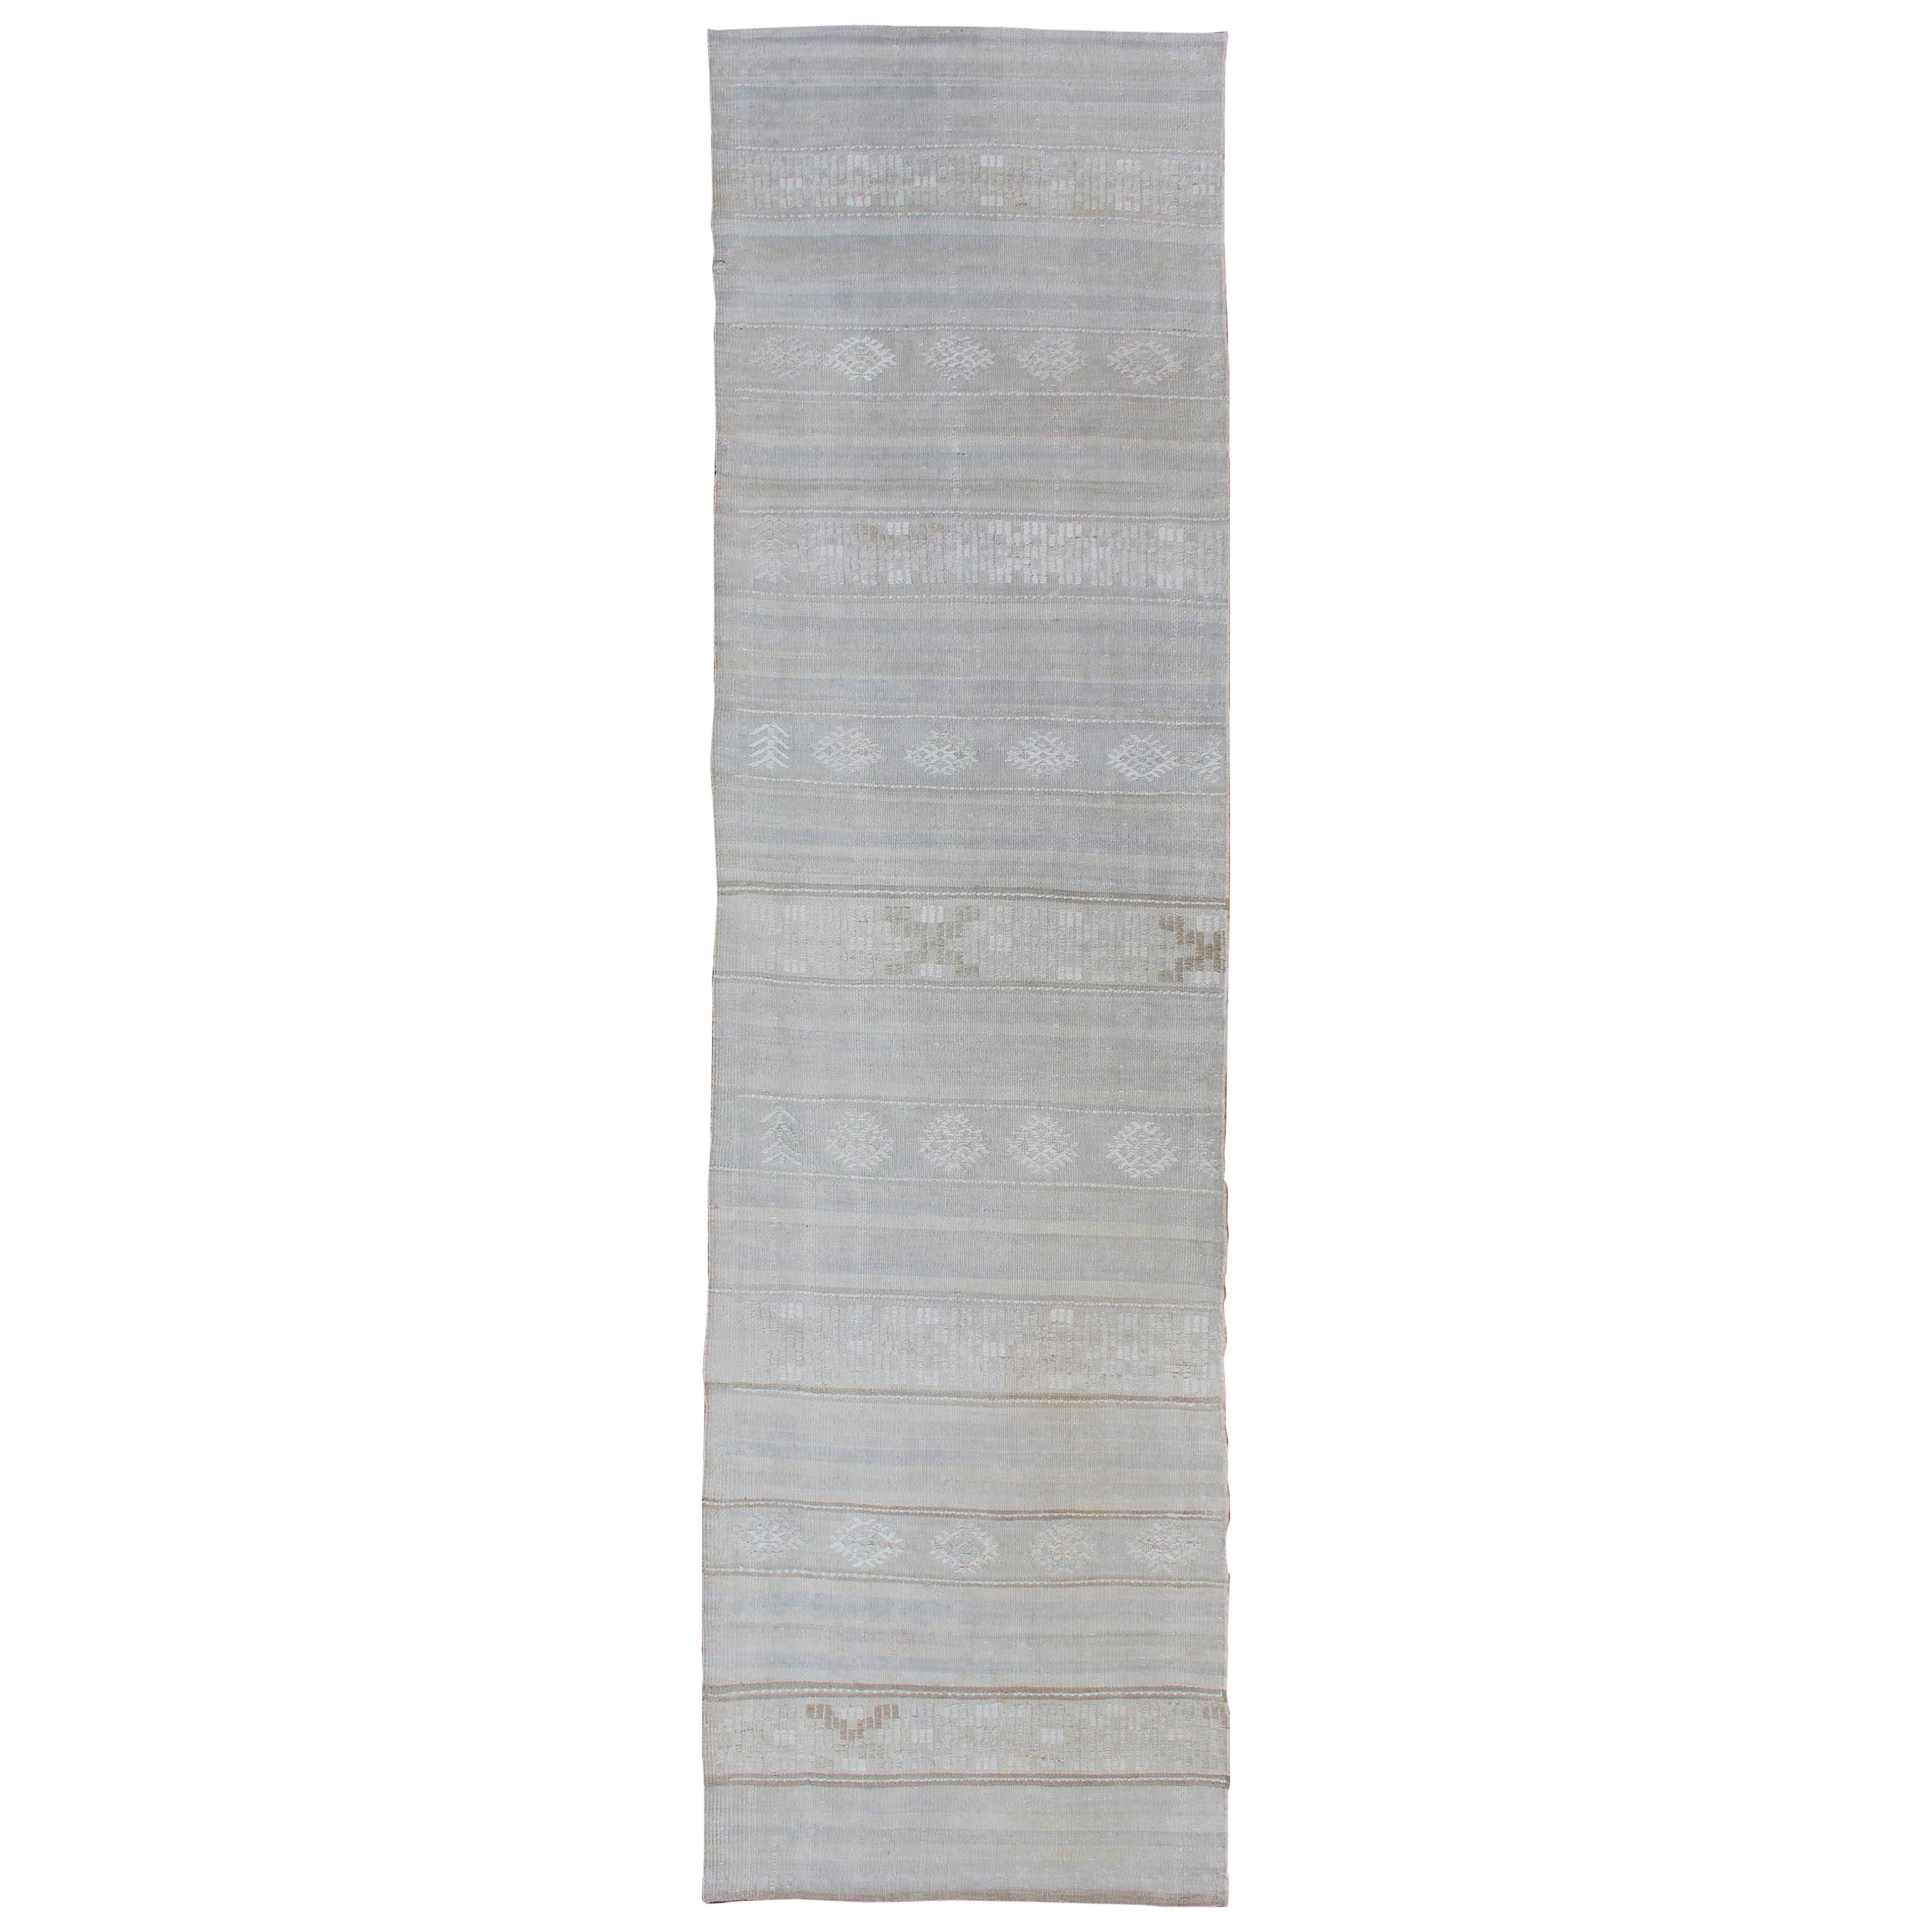 Vintage Turkish Kilim Runner with Stripes in Light Grey and Muted Tones